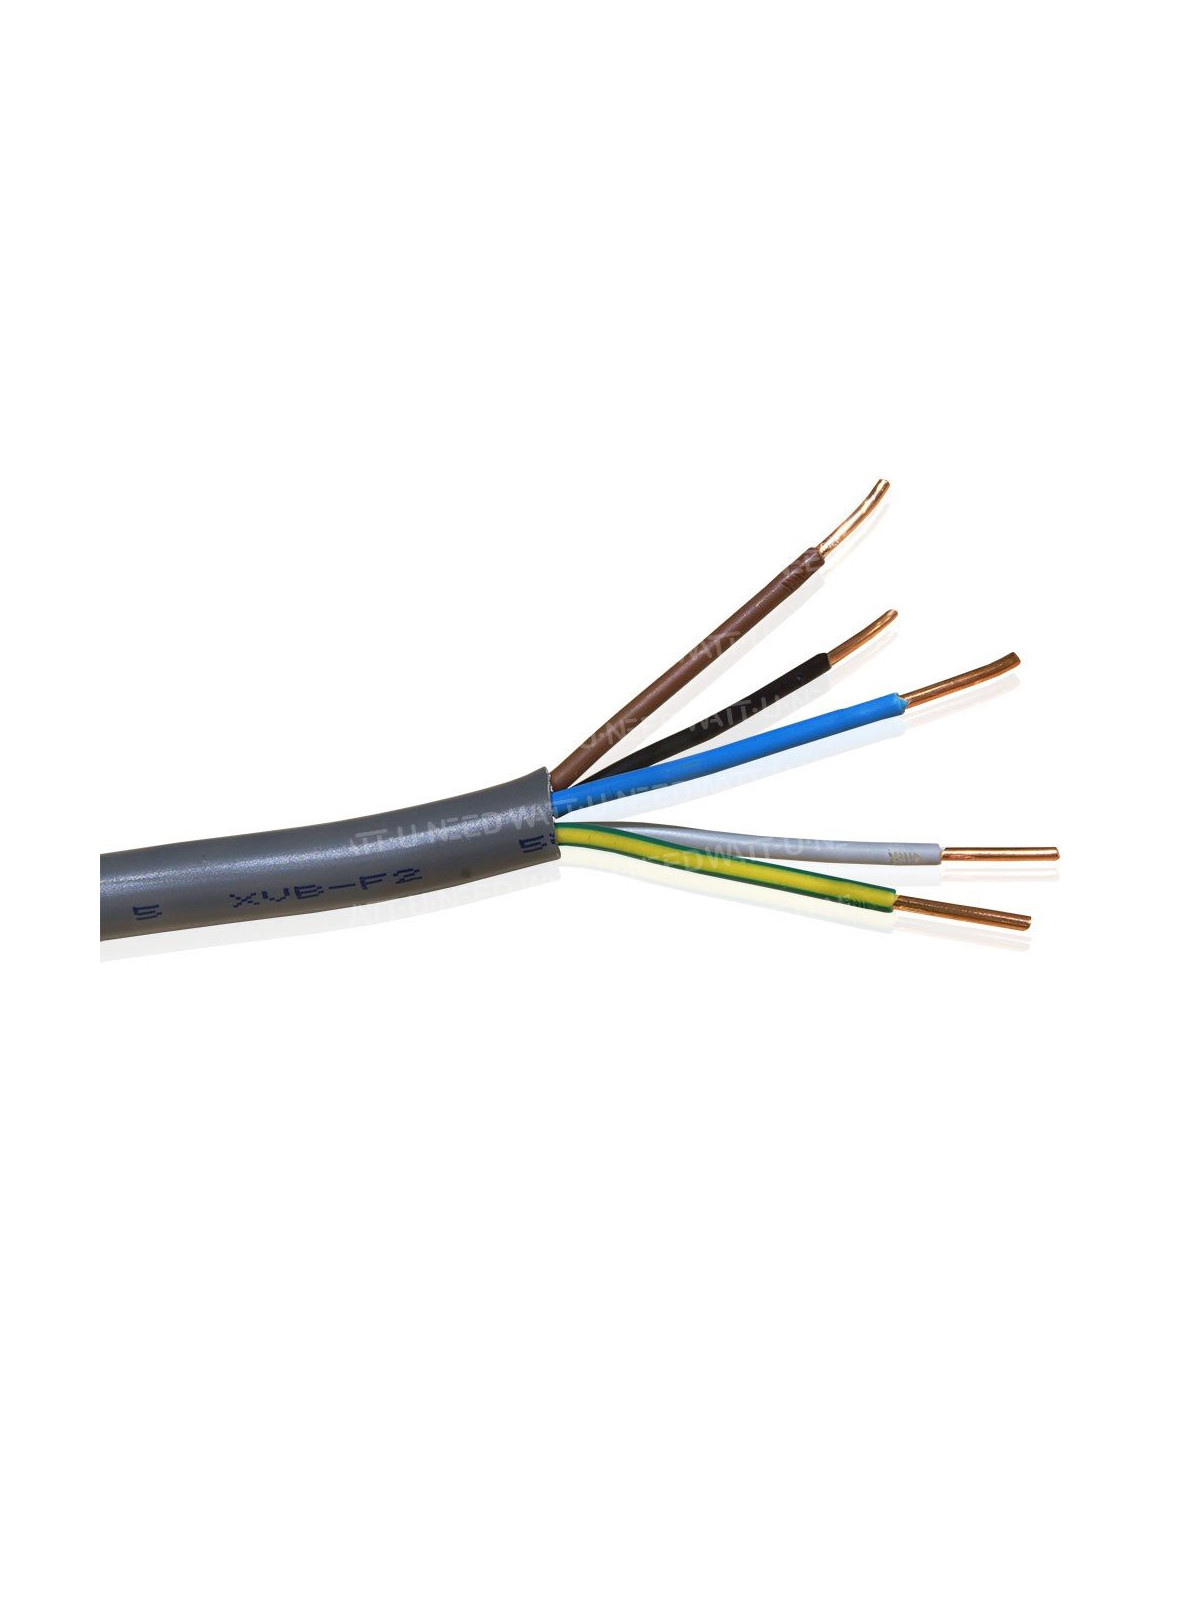 XVB 5G6 mm - 1m electric cable